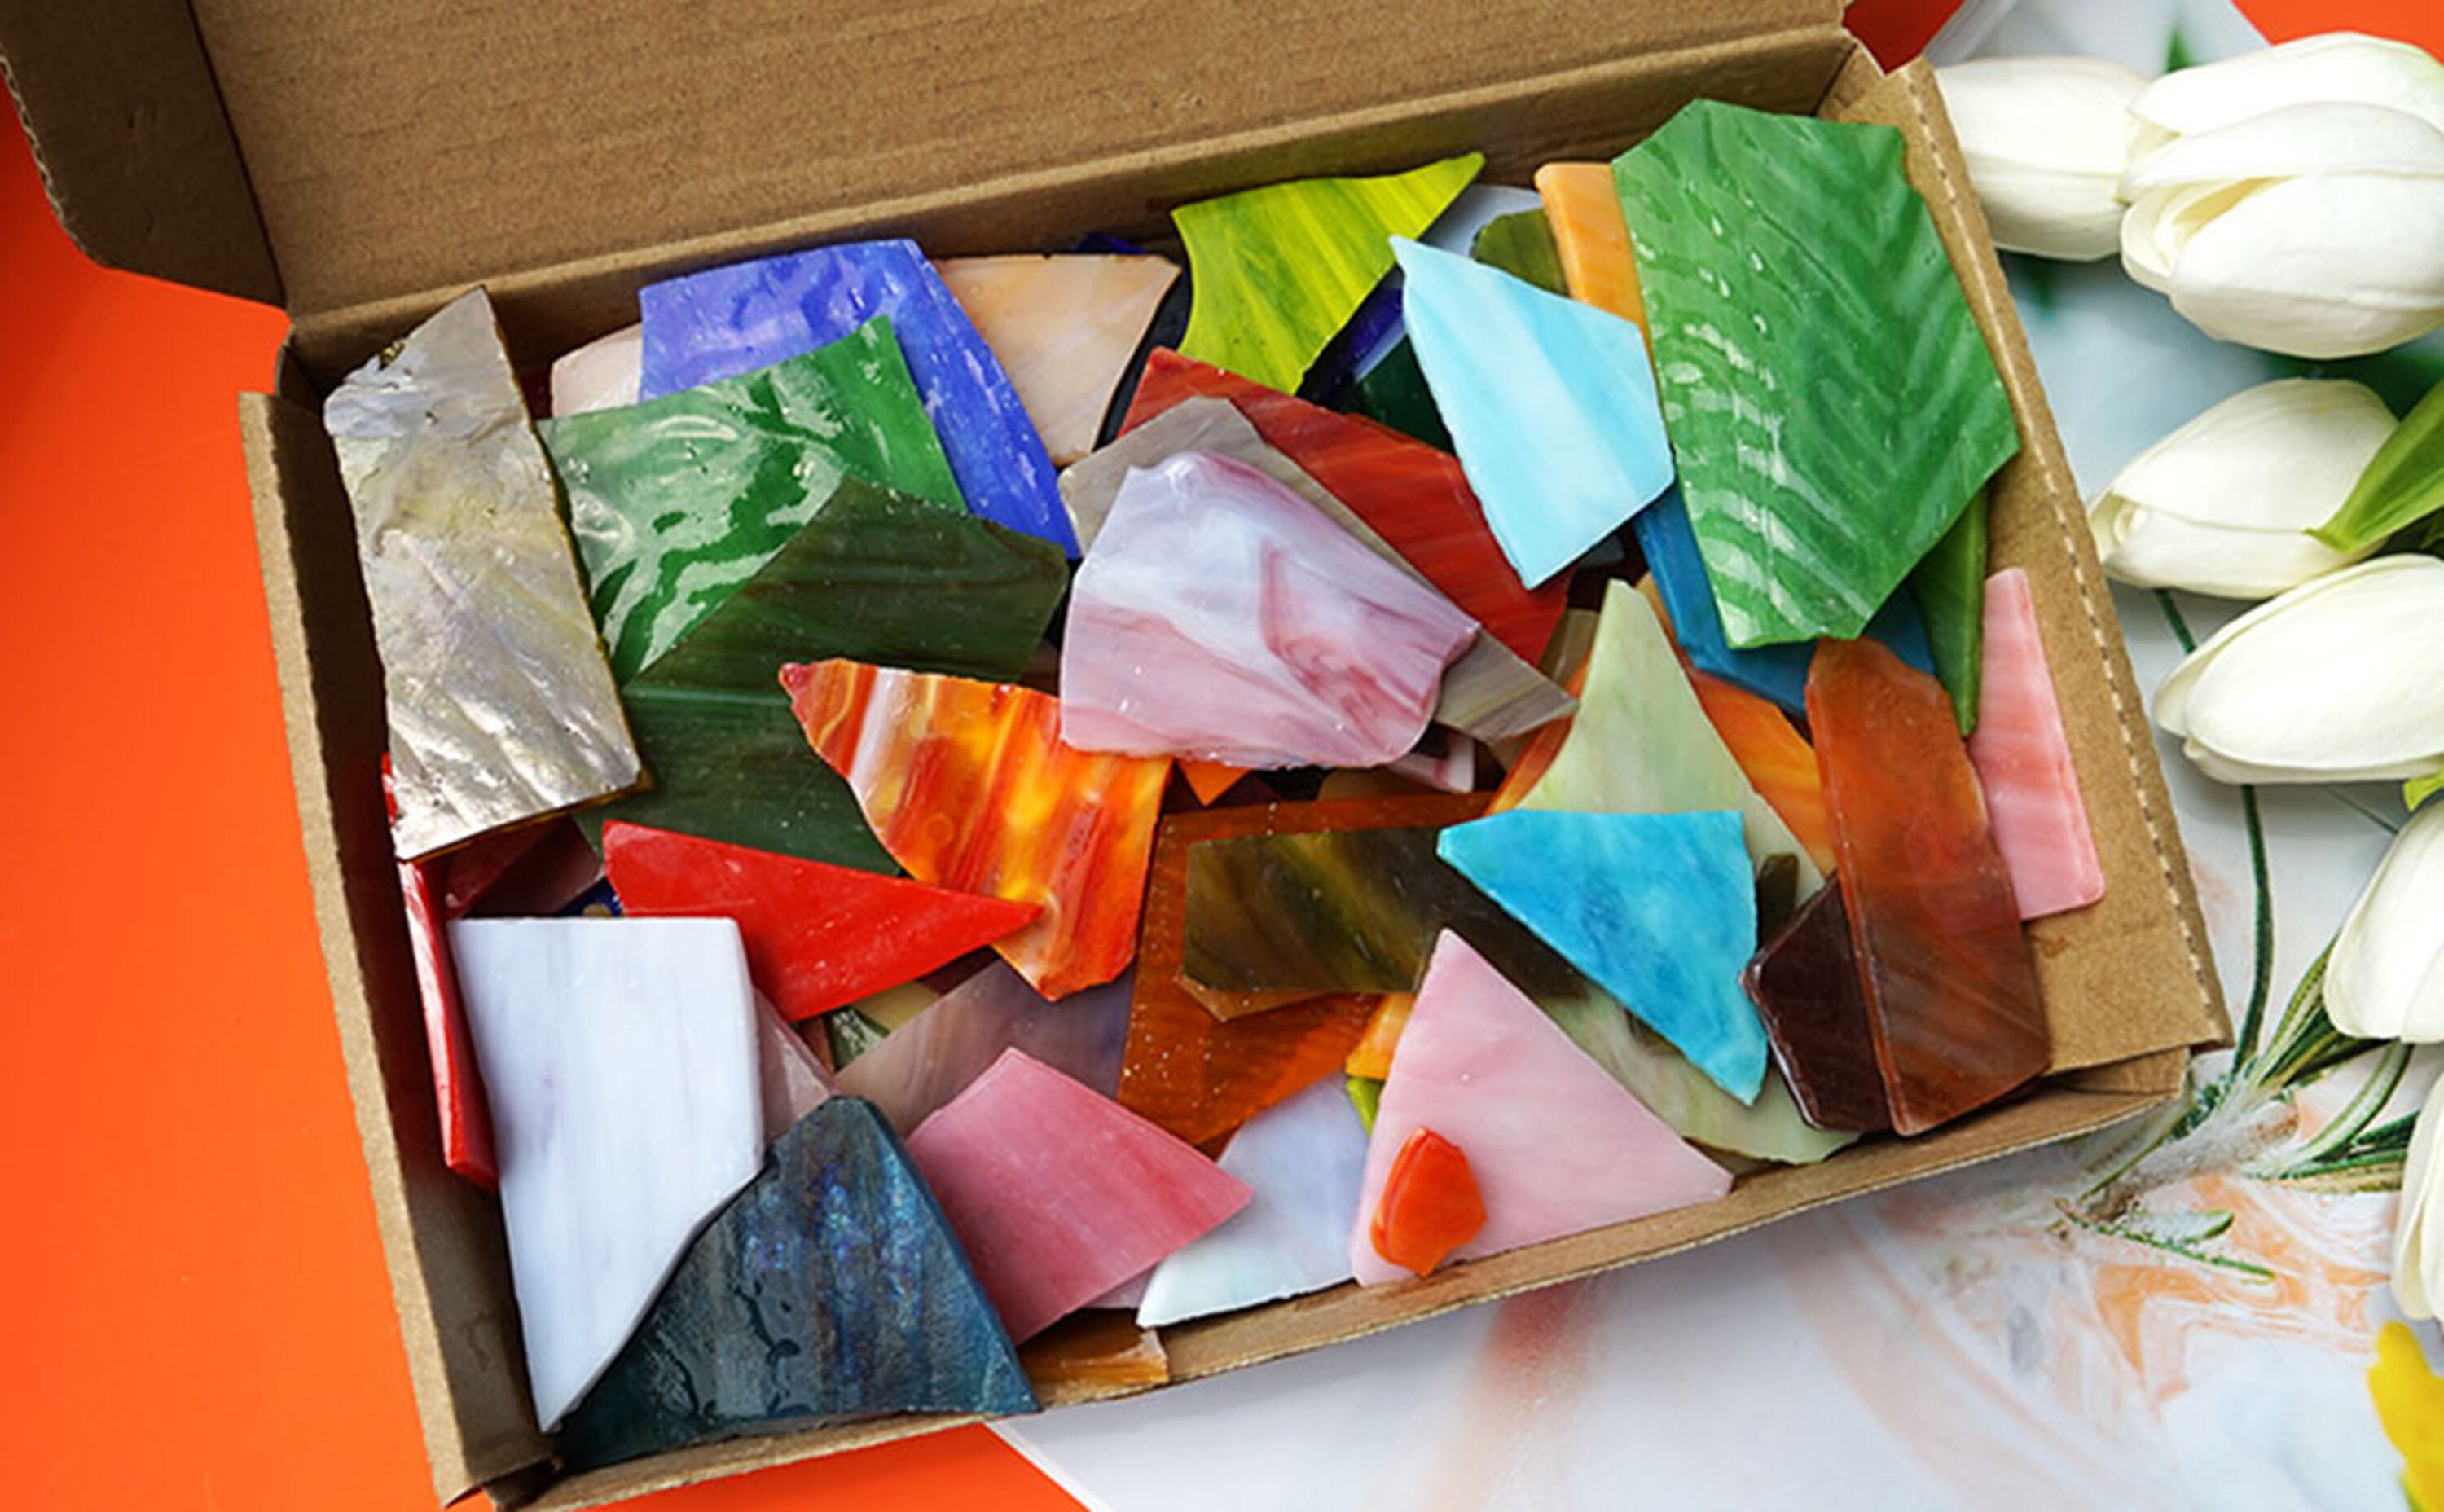 Irregular Mosaic Glass Pieces 500g for , Crushed Stained Glass Tiles,  Assorted Colors and Shapes Mosaic Art Supplies (Mixed Assorted Colors) 